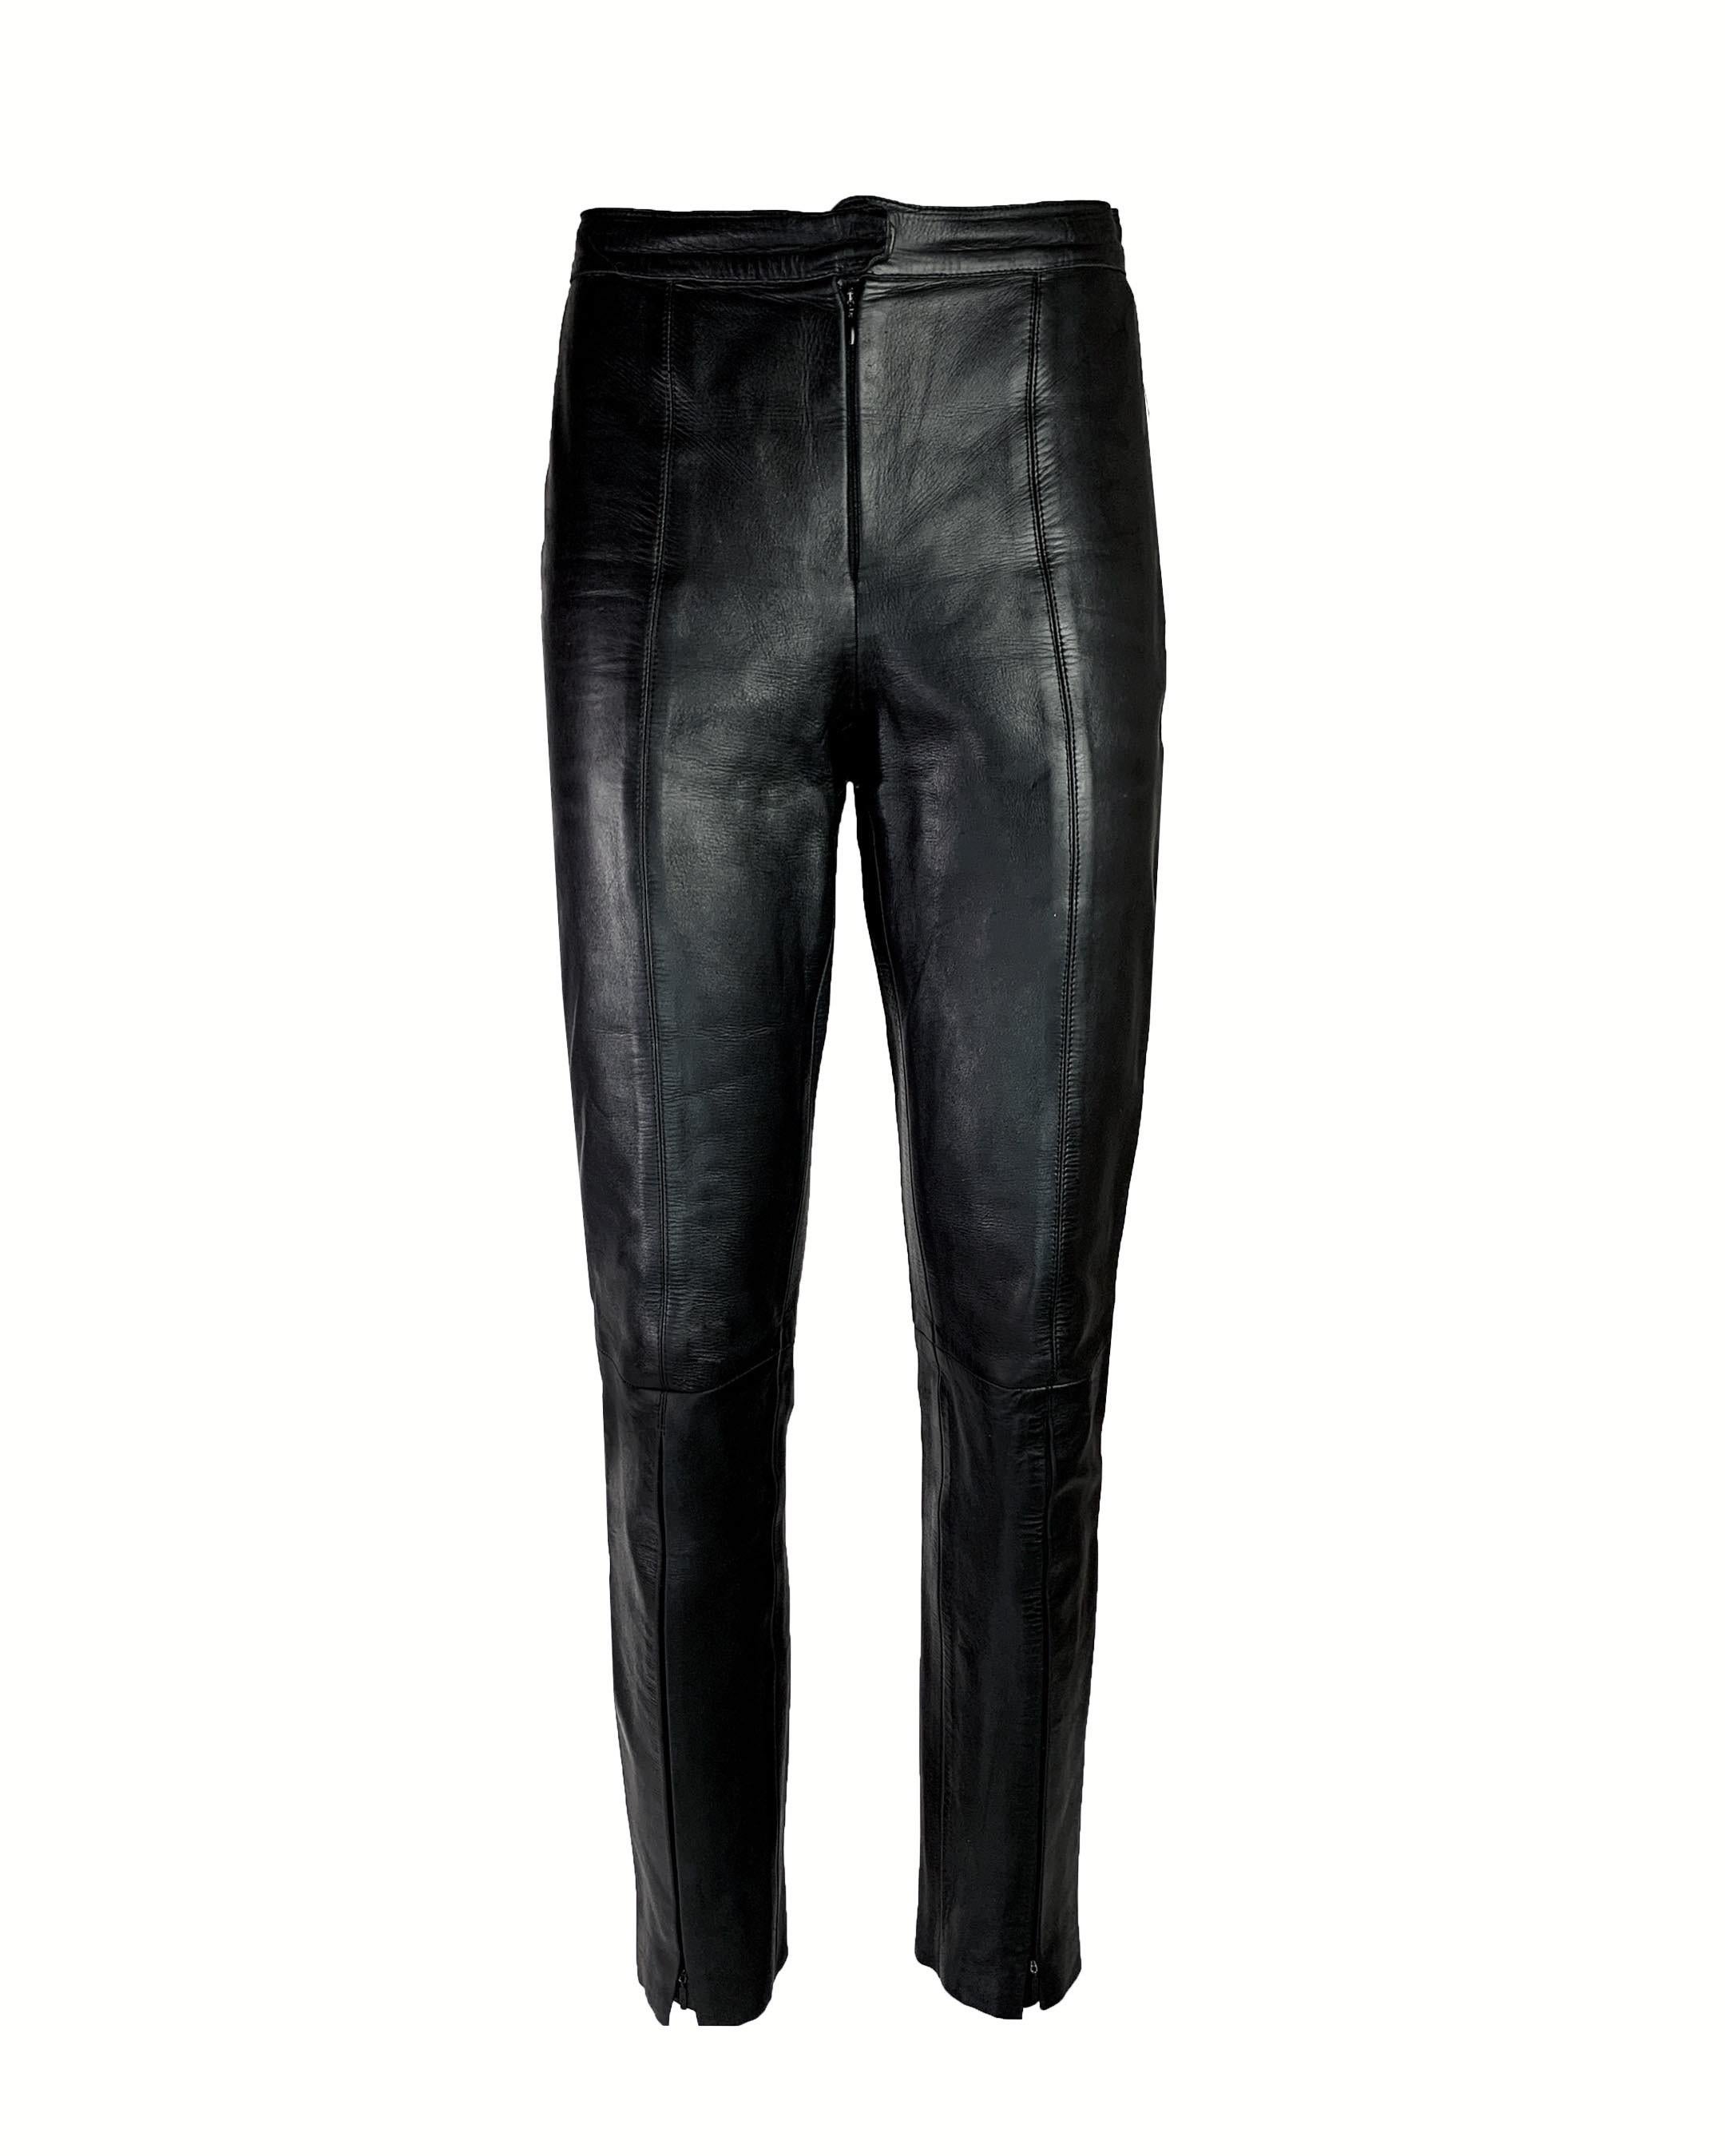 These stunning iconic leather pants were infamously seen on Victoria Beckham when her and David made noise wearing matching Gucci by Tom Ford Leather outfits! 

The pants feature an open-style sexy zipper, also additional zippers on the bottom to